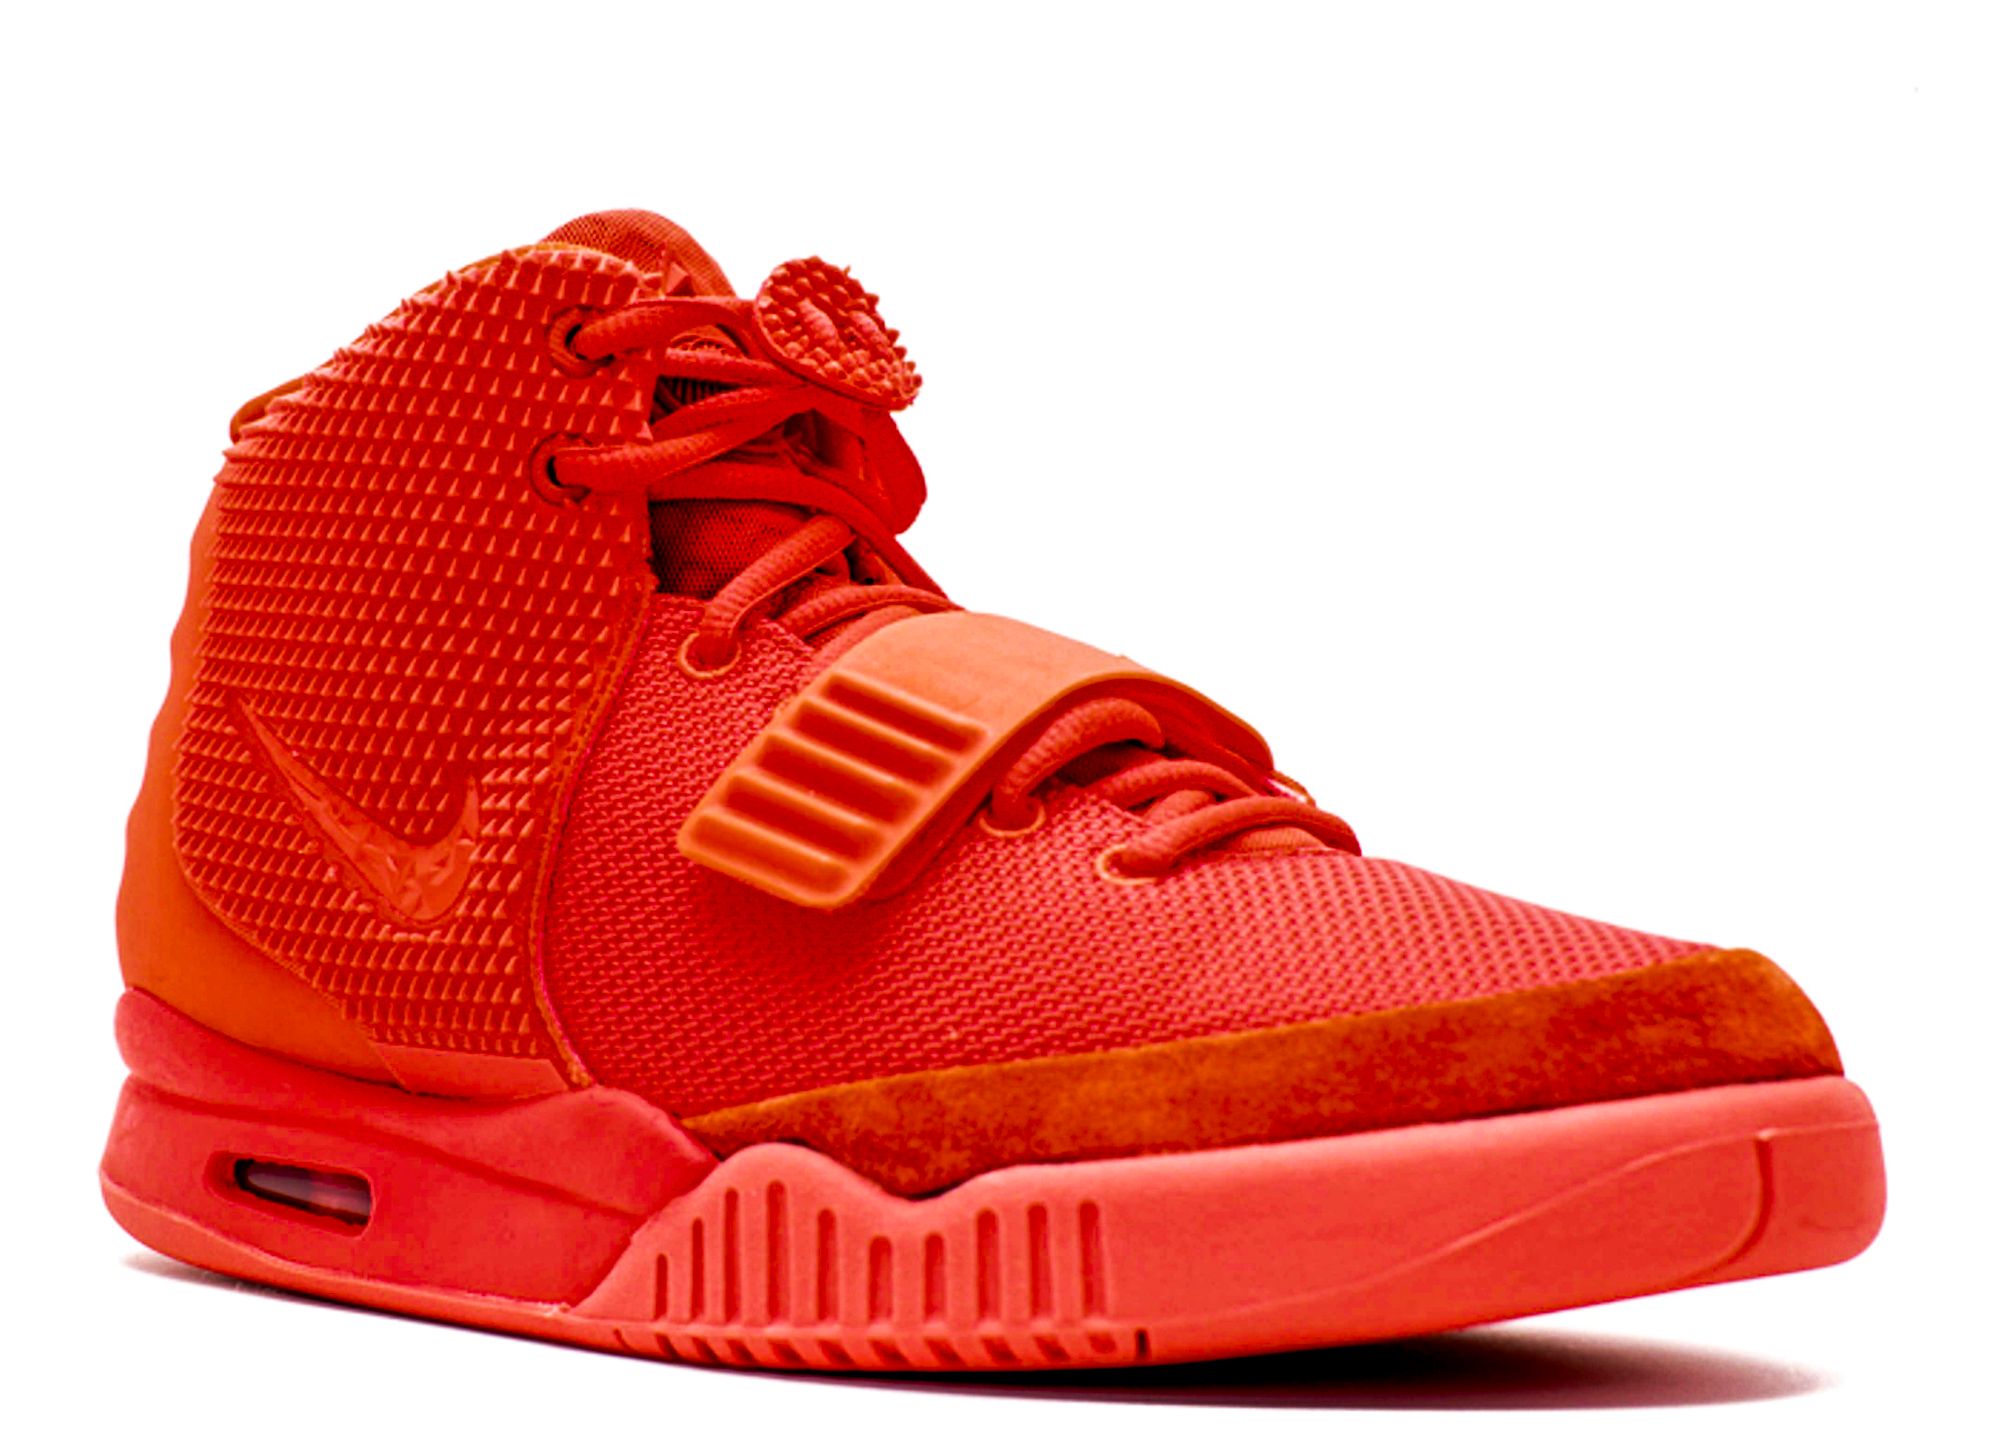 air yeezy 2 red october release date